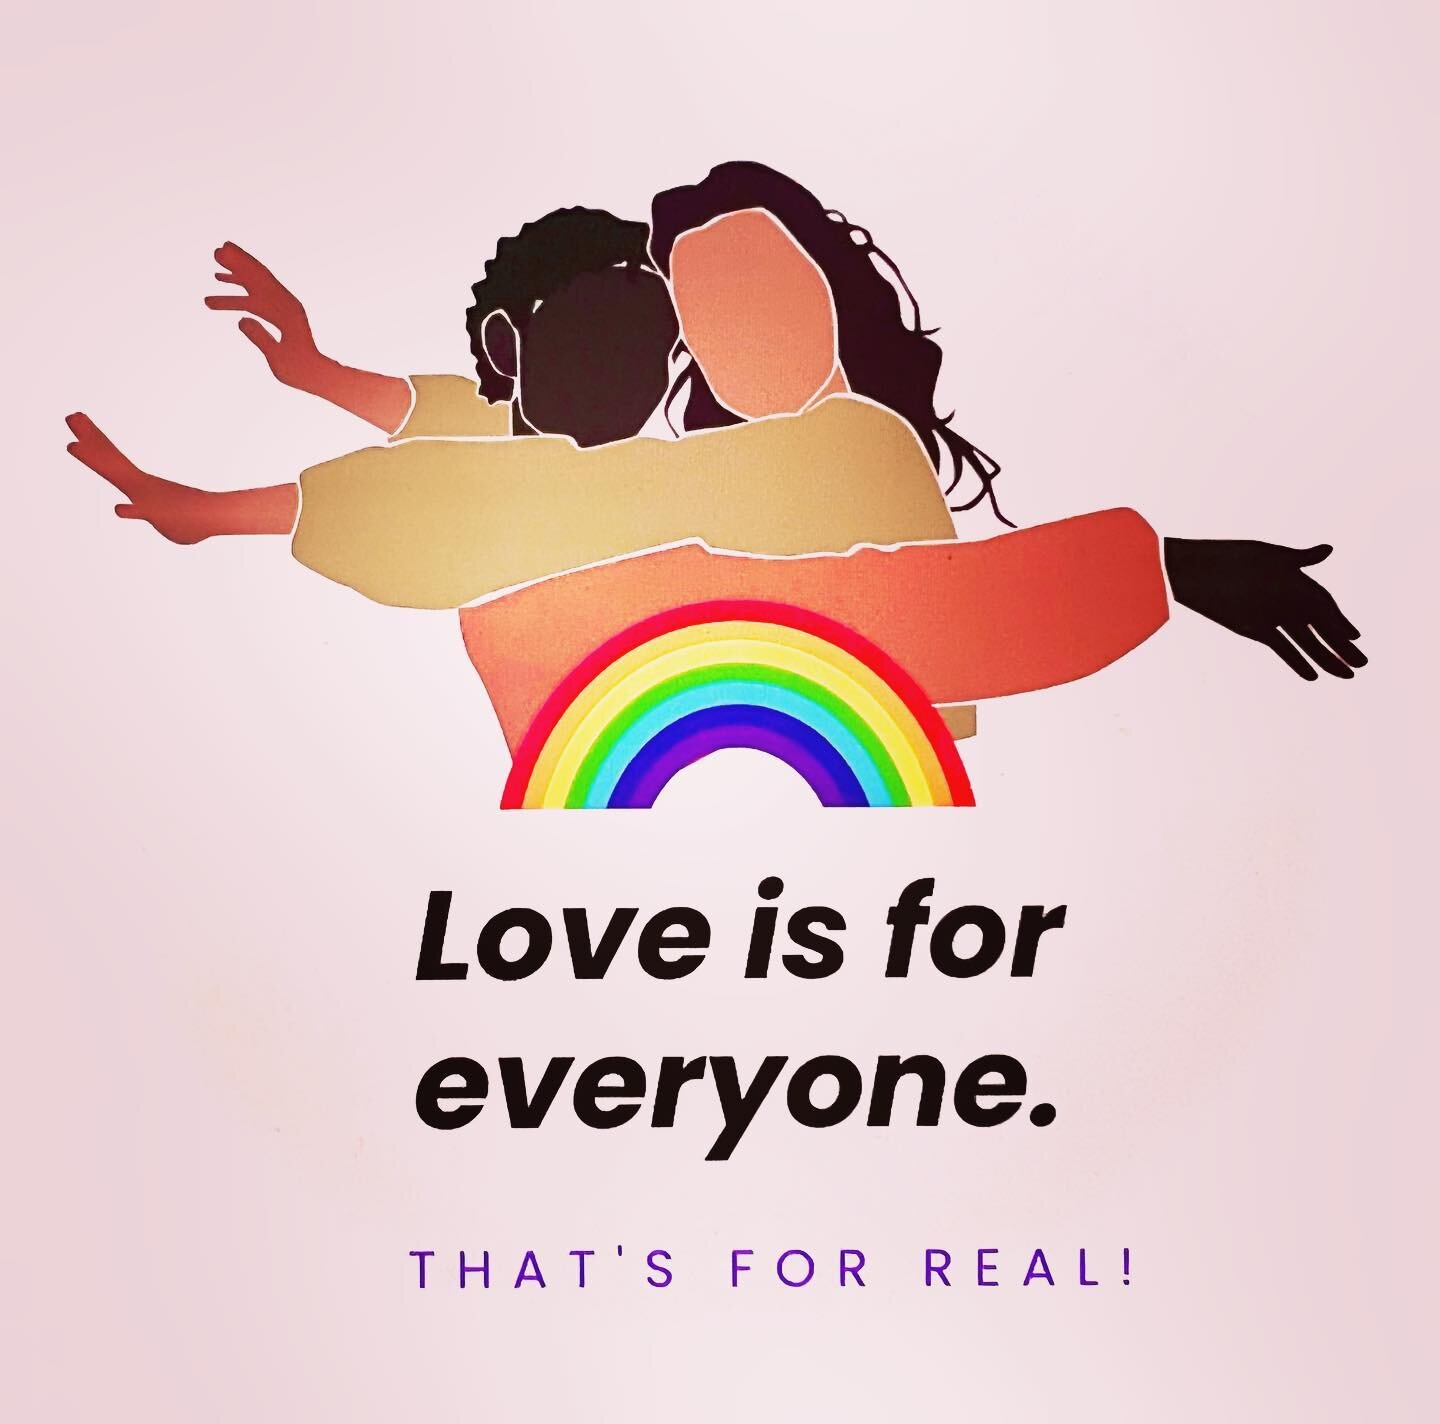 YES!!!!!
1,000,000,000,000 times 534 this is true! 
Let&rsquo;s shout it!
LOVE IS FOR EVERYONE! 
Love is love! 
Happy pride! 
Let&rsquo;s remember this always!!!! 
C&rsquo;mon peeps!

#heydaysalonpdx #heydaysalon #pnw #pride #prideportland #loveislov